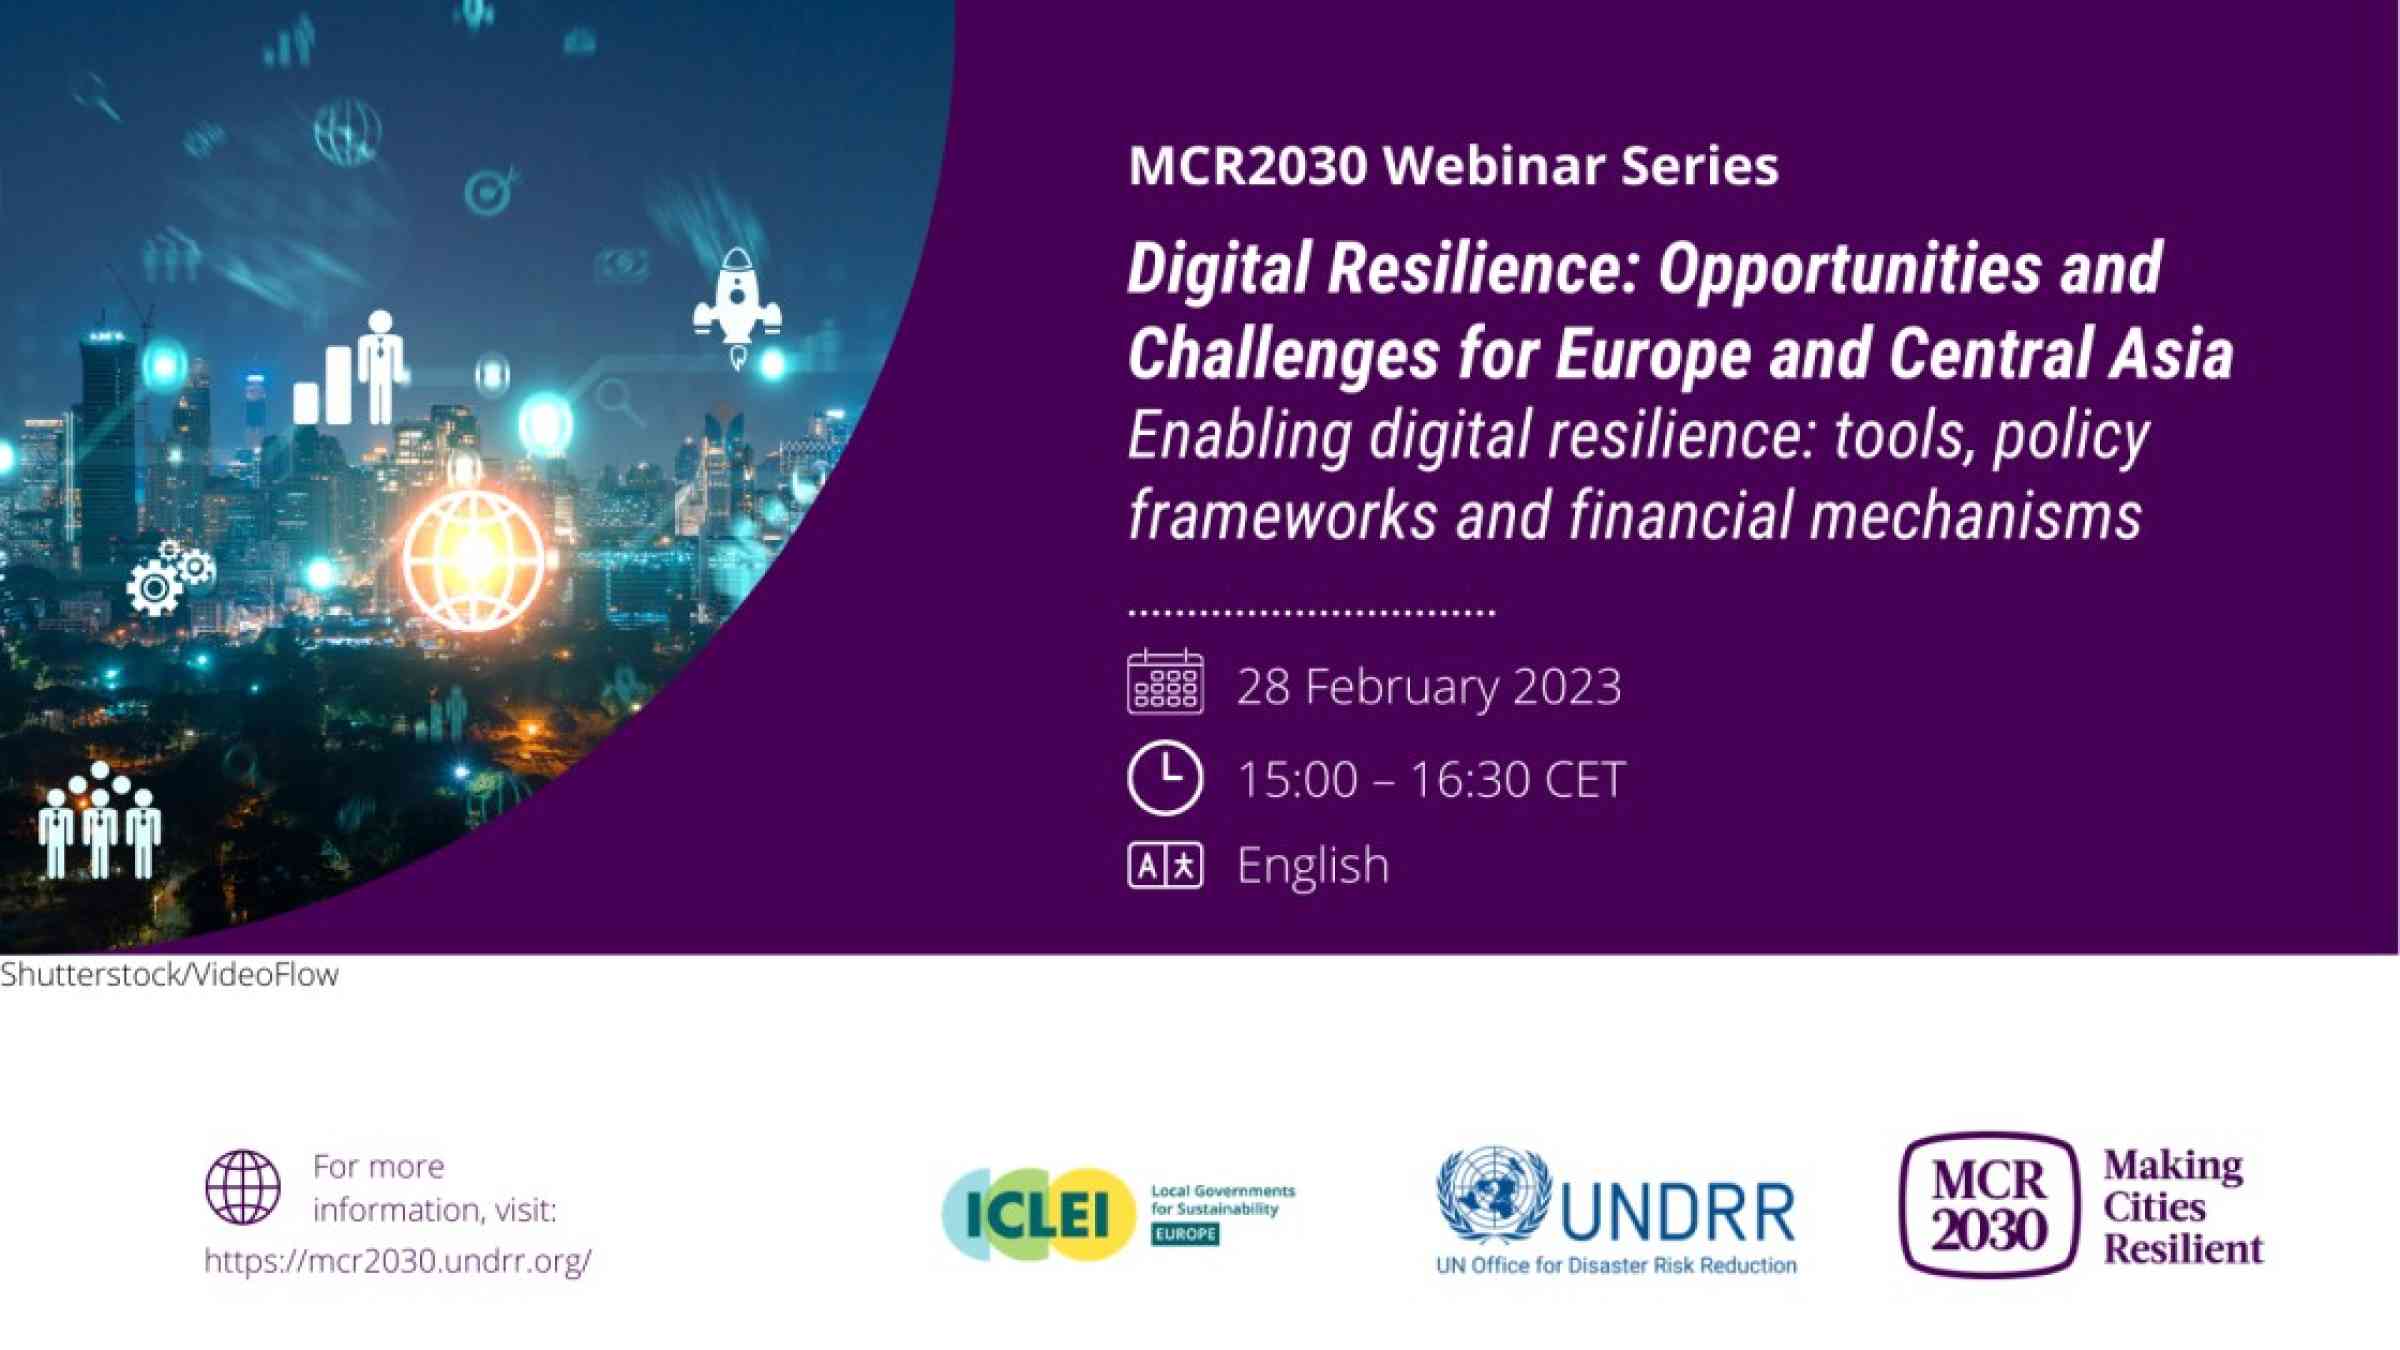 Enabling digital resilience: tools, policy frameworks and financial mechanisms